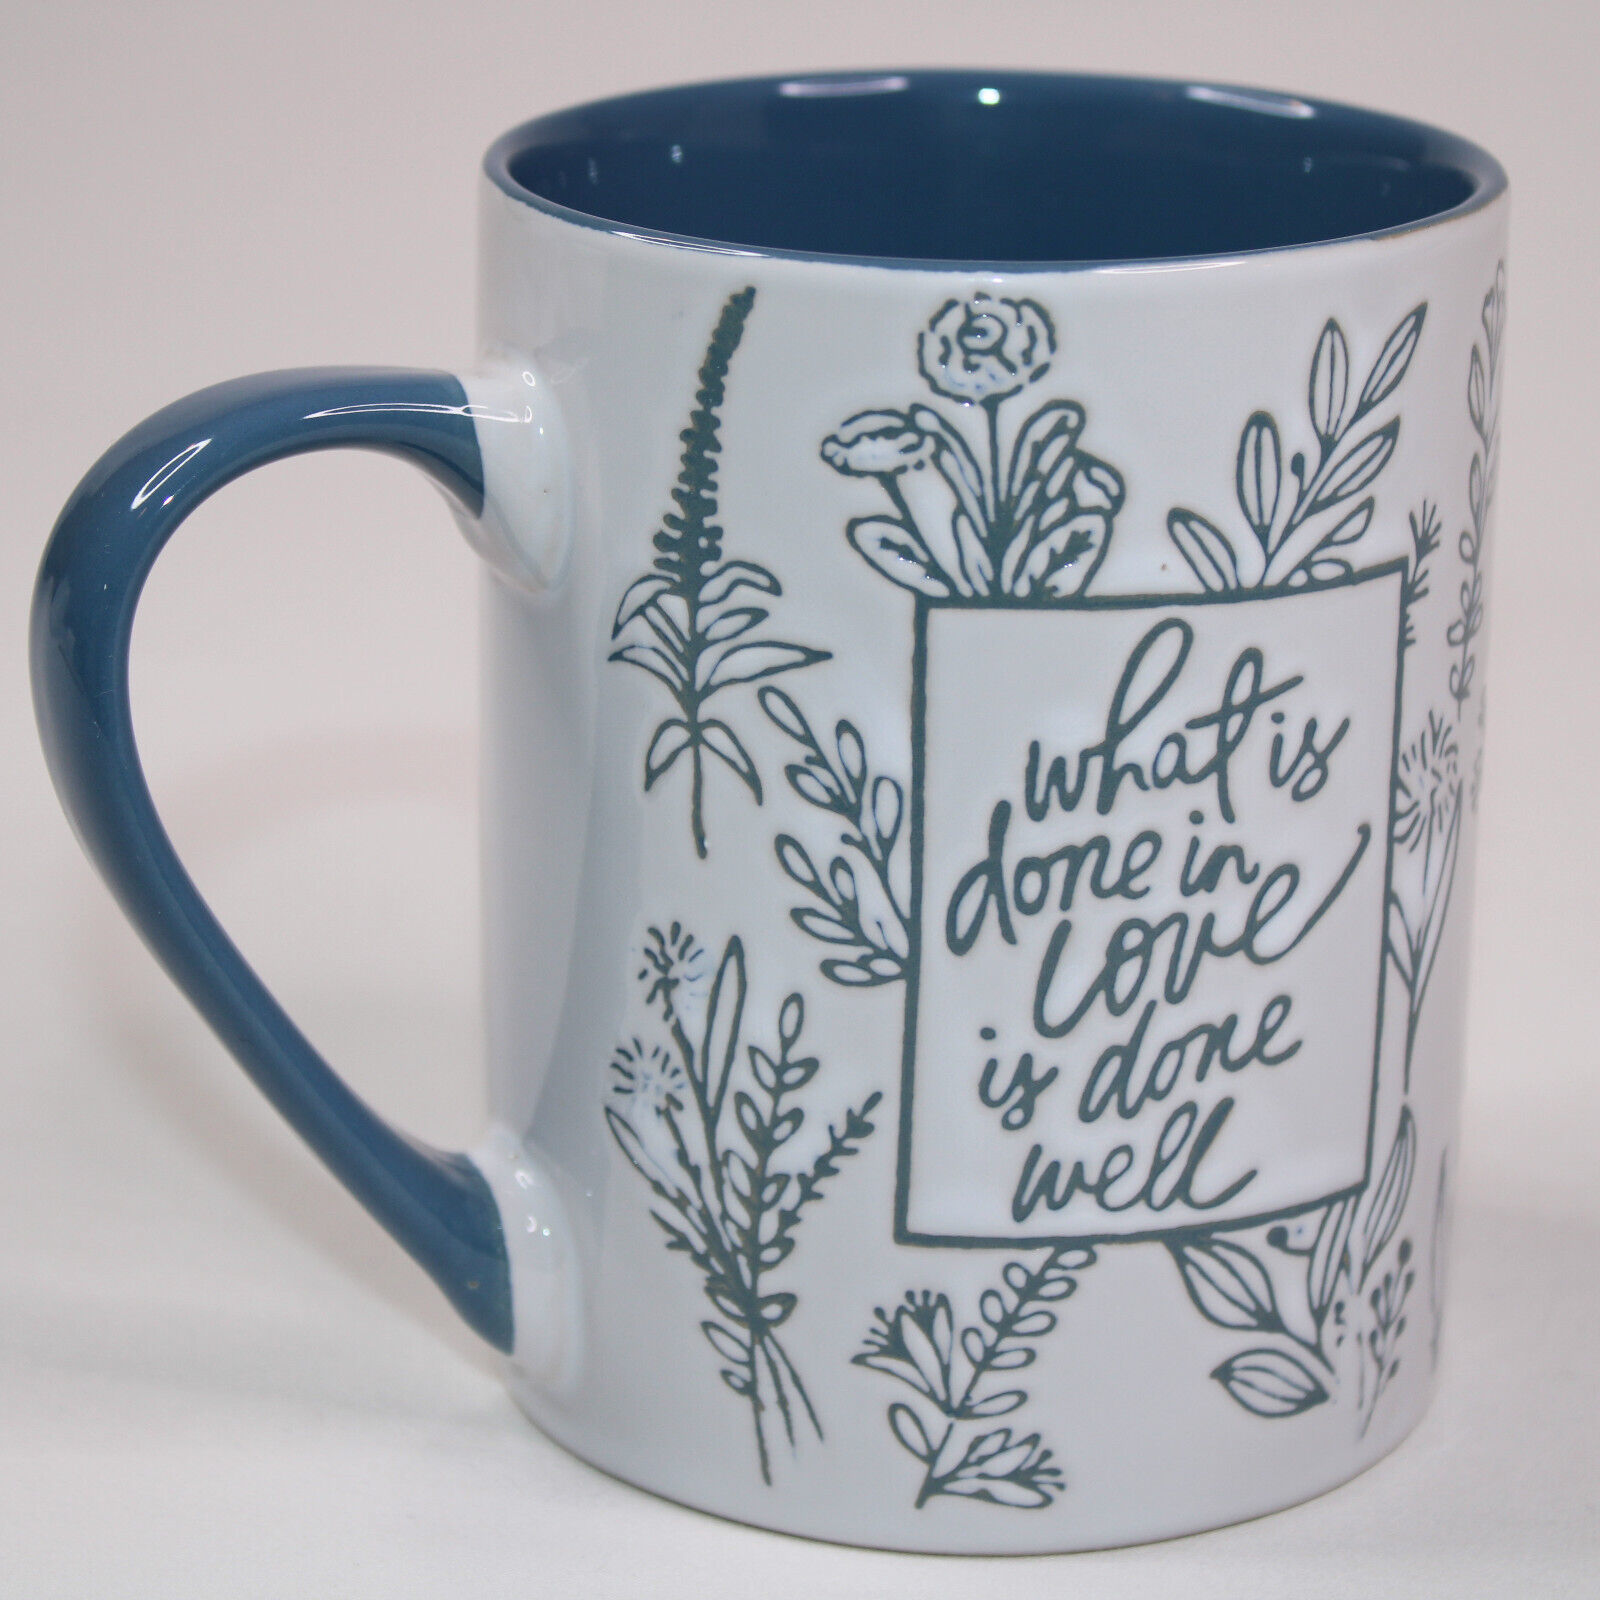 Primary image for “What Is Done In Love Is Done Well” White And Blue Floral Cup Quoted Coffee Mug 